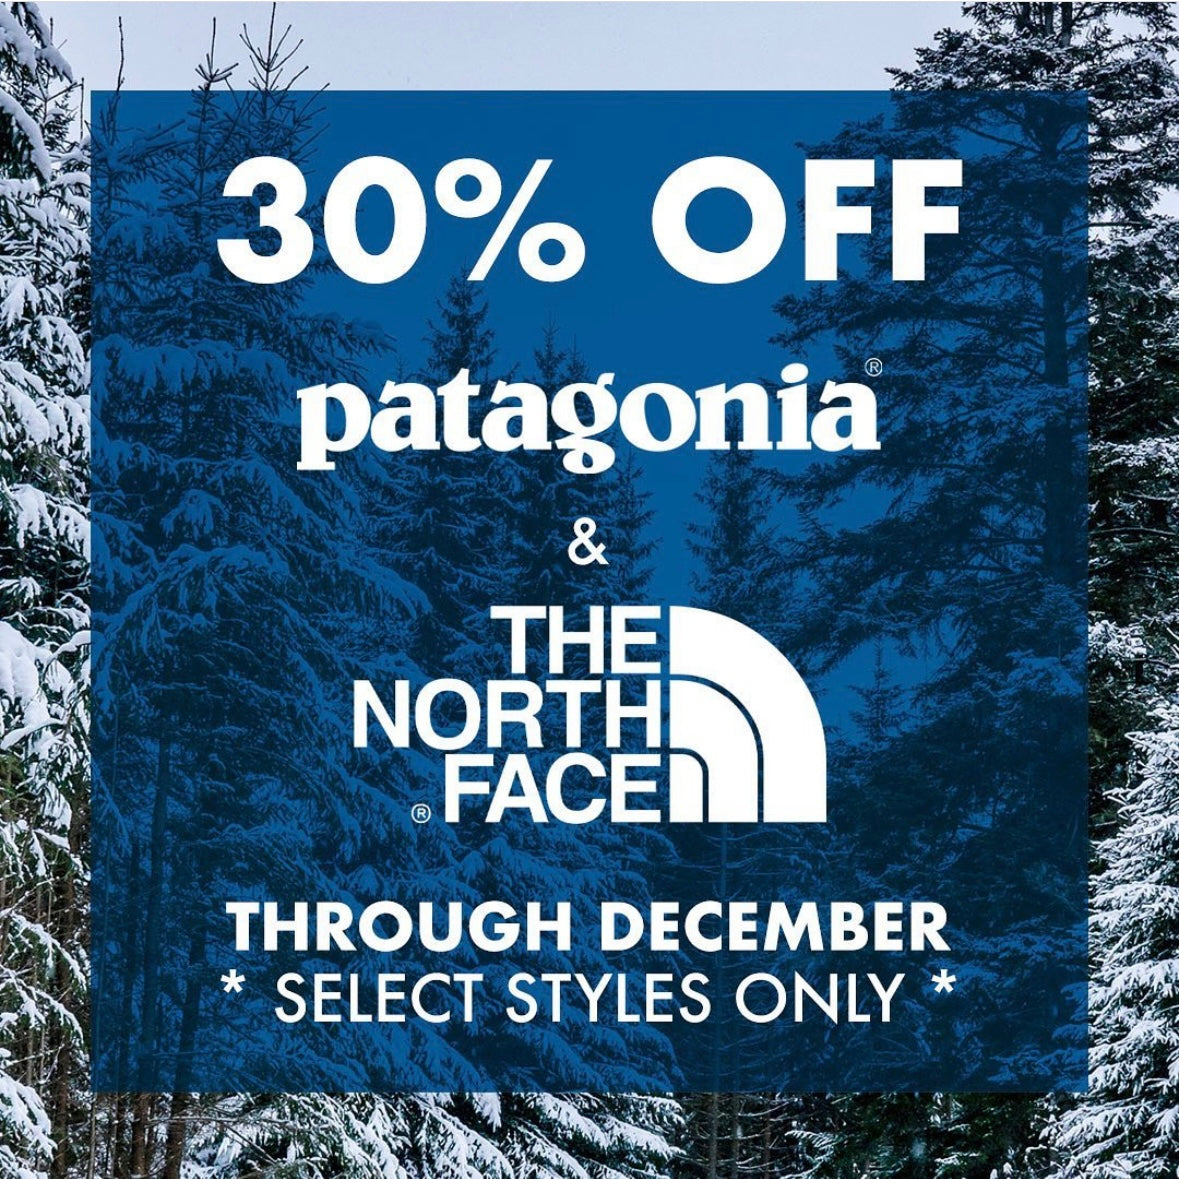 30% OFF Patagonia and The North Face select styles through December